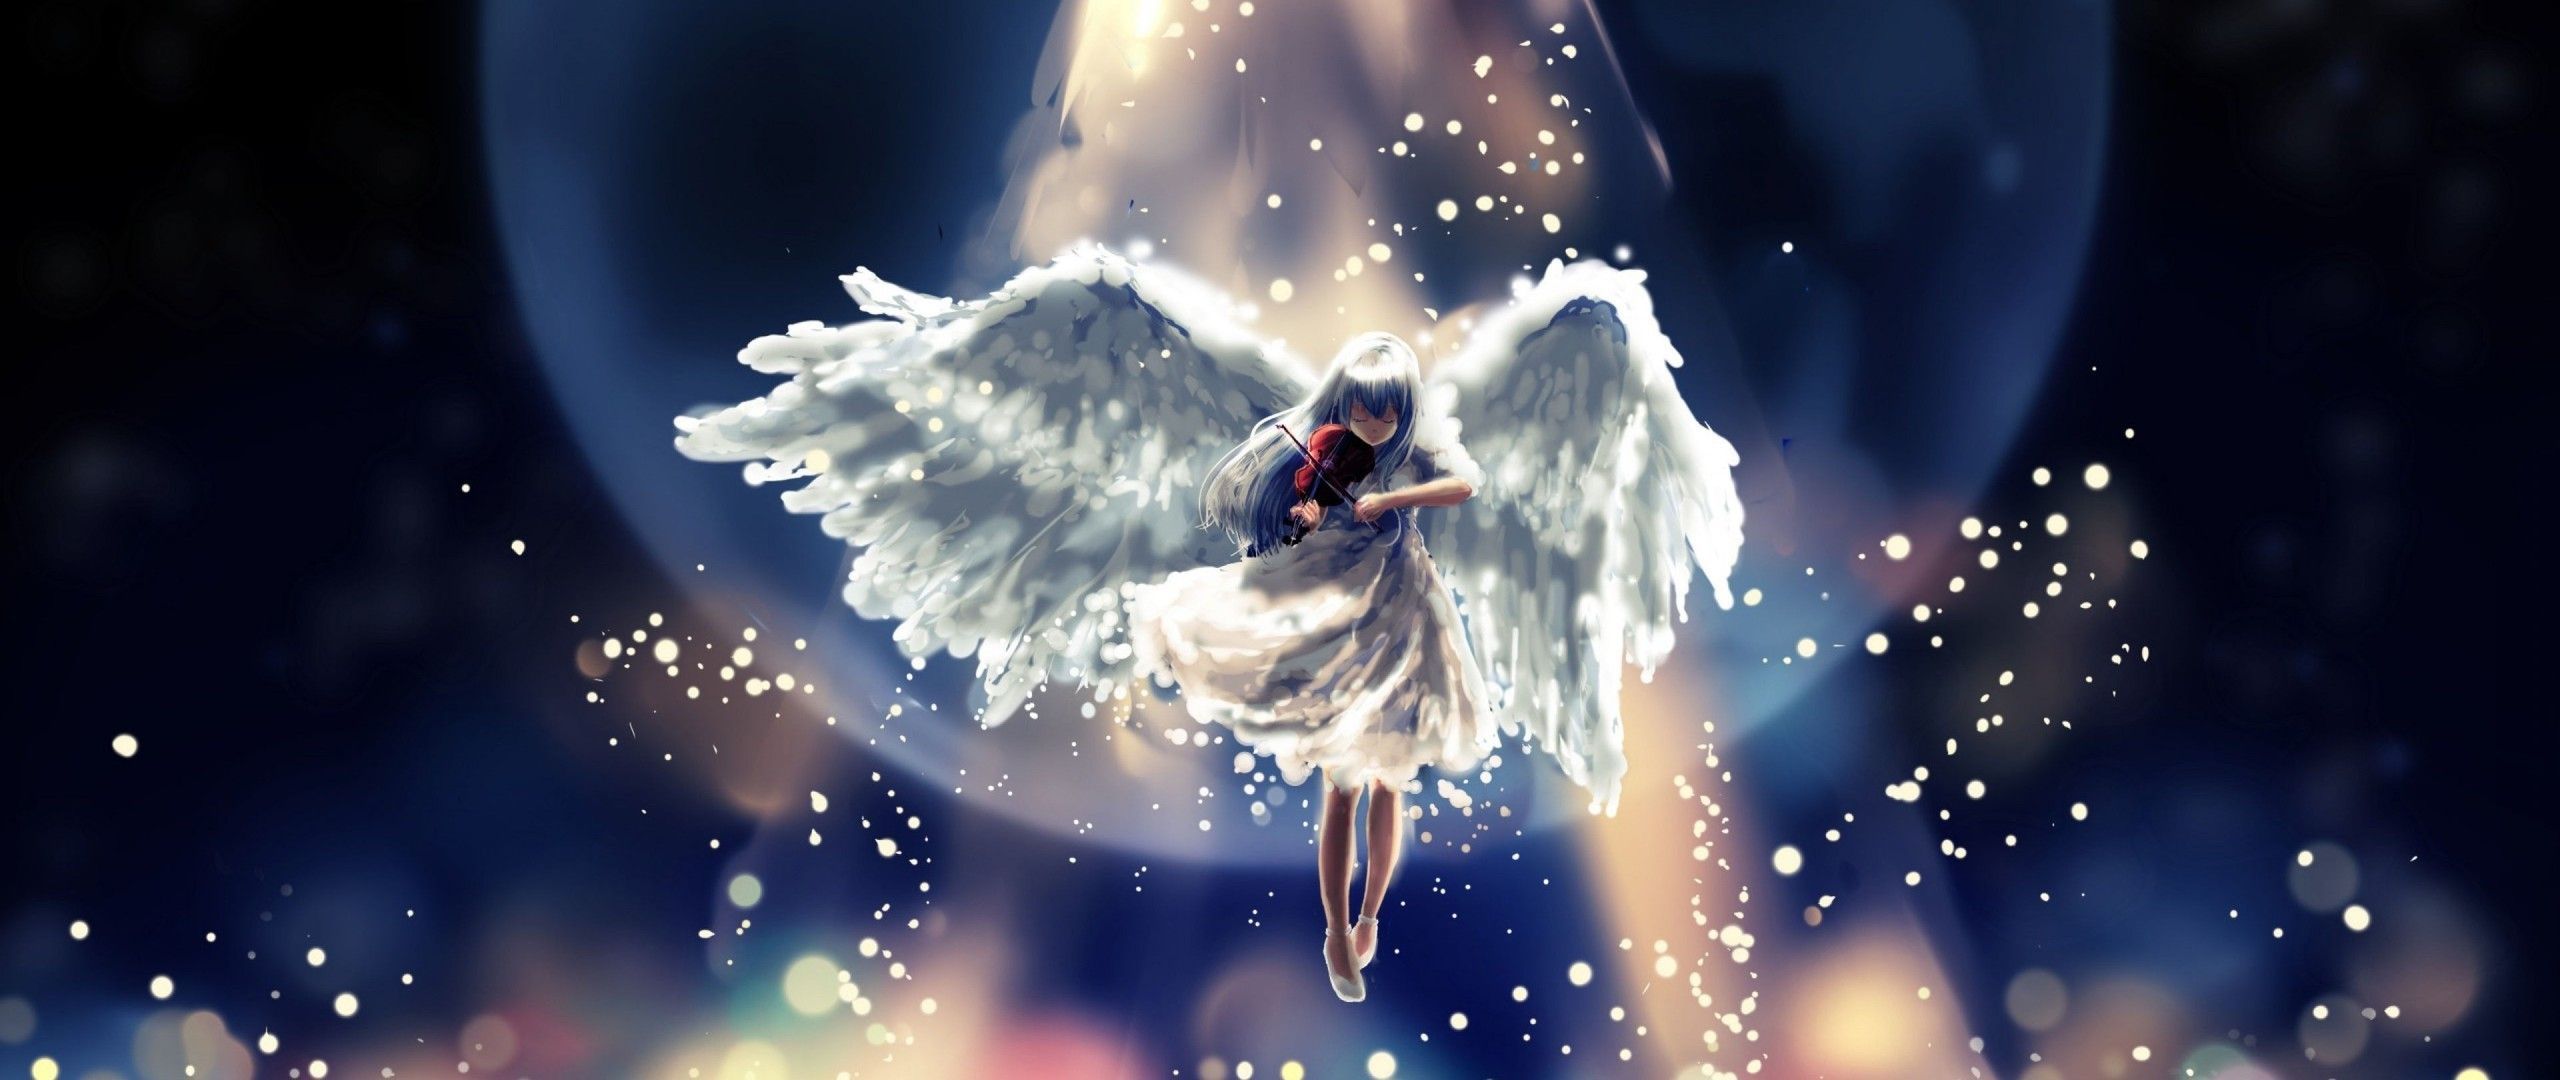 A beautiful anime girl with white wings flying in the sky - Wings